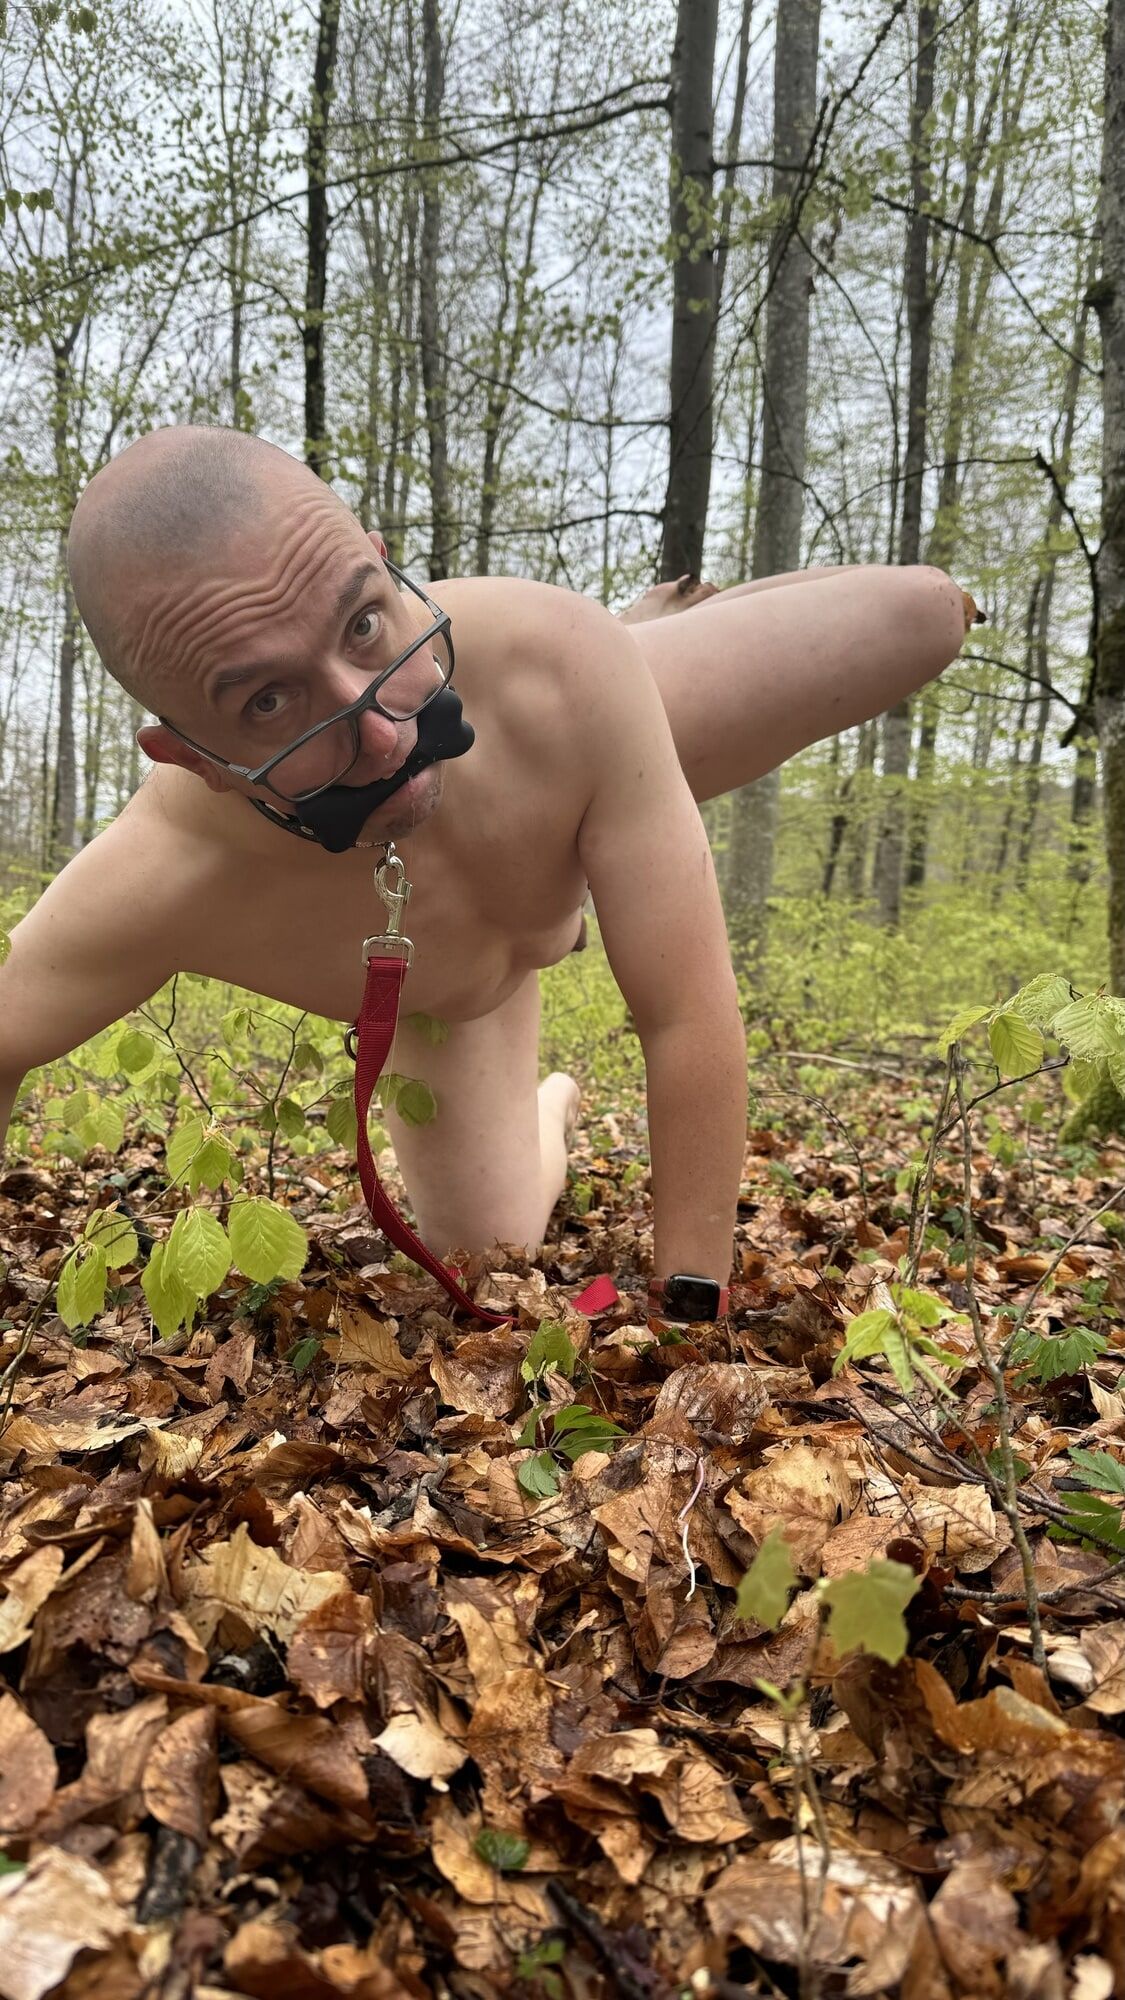 Slave whore naked in the forest #4